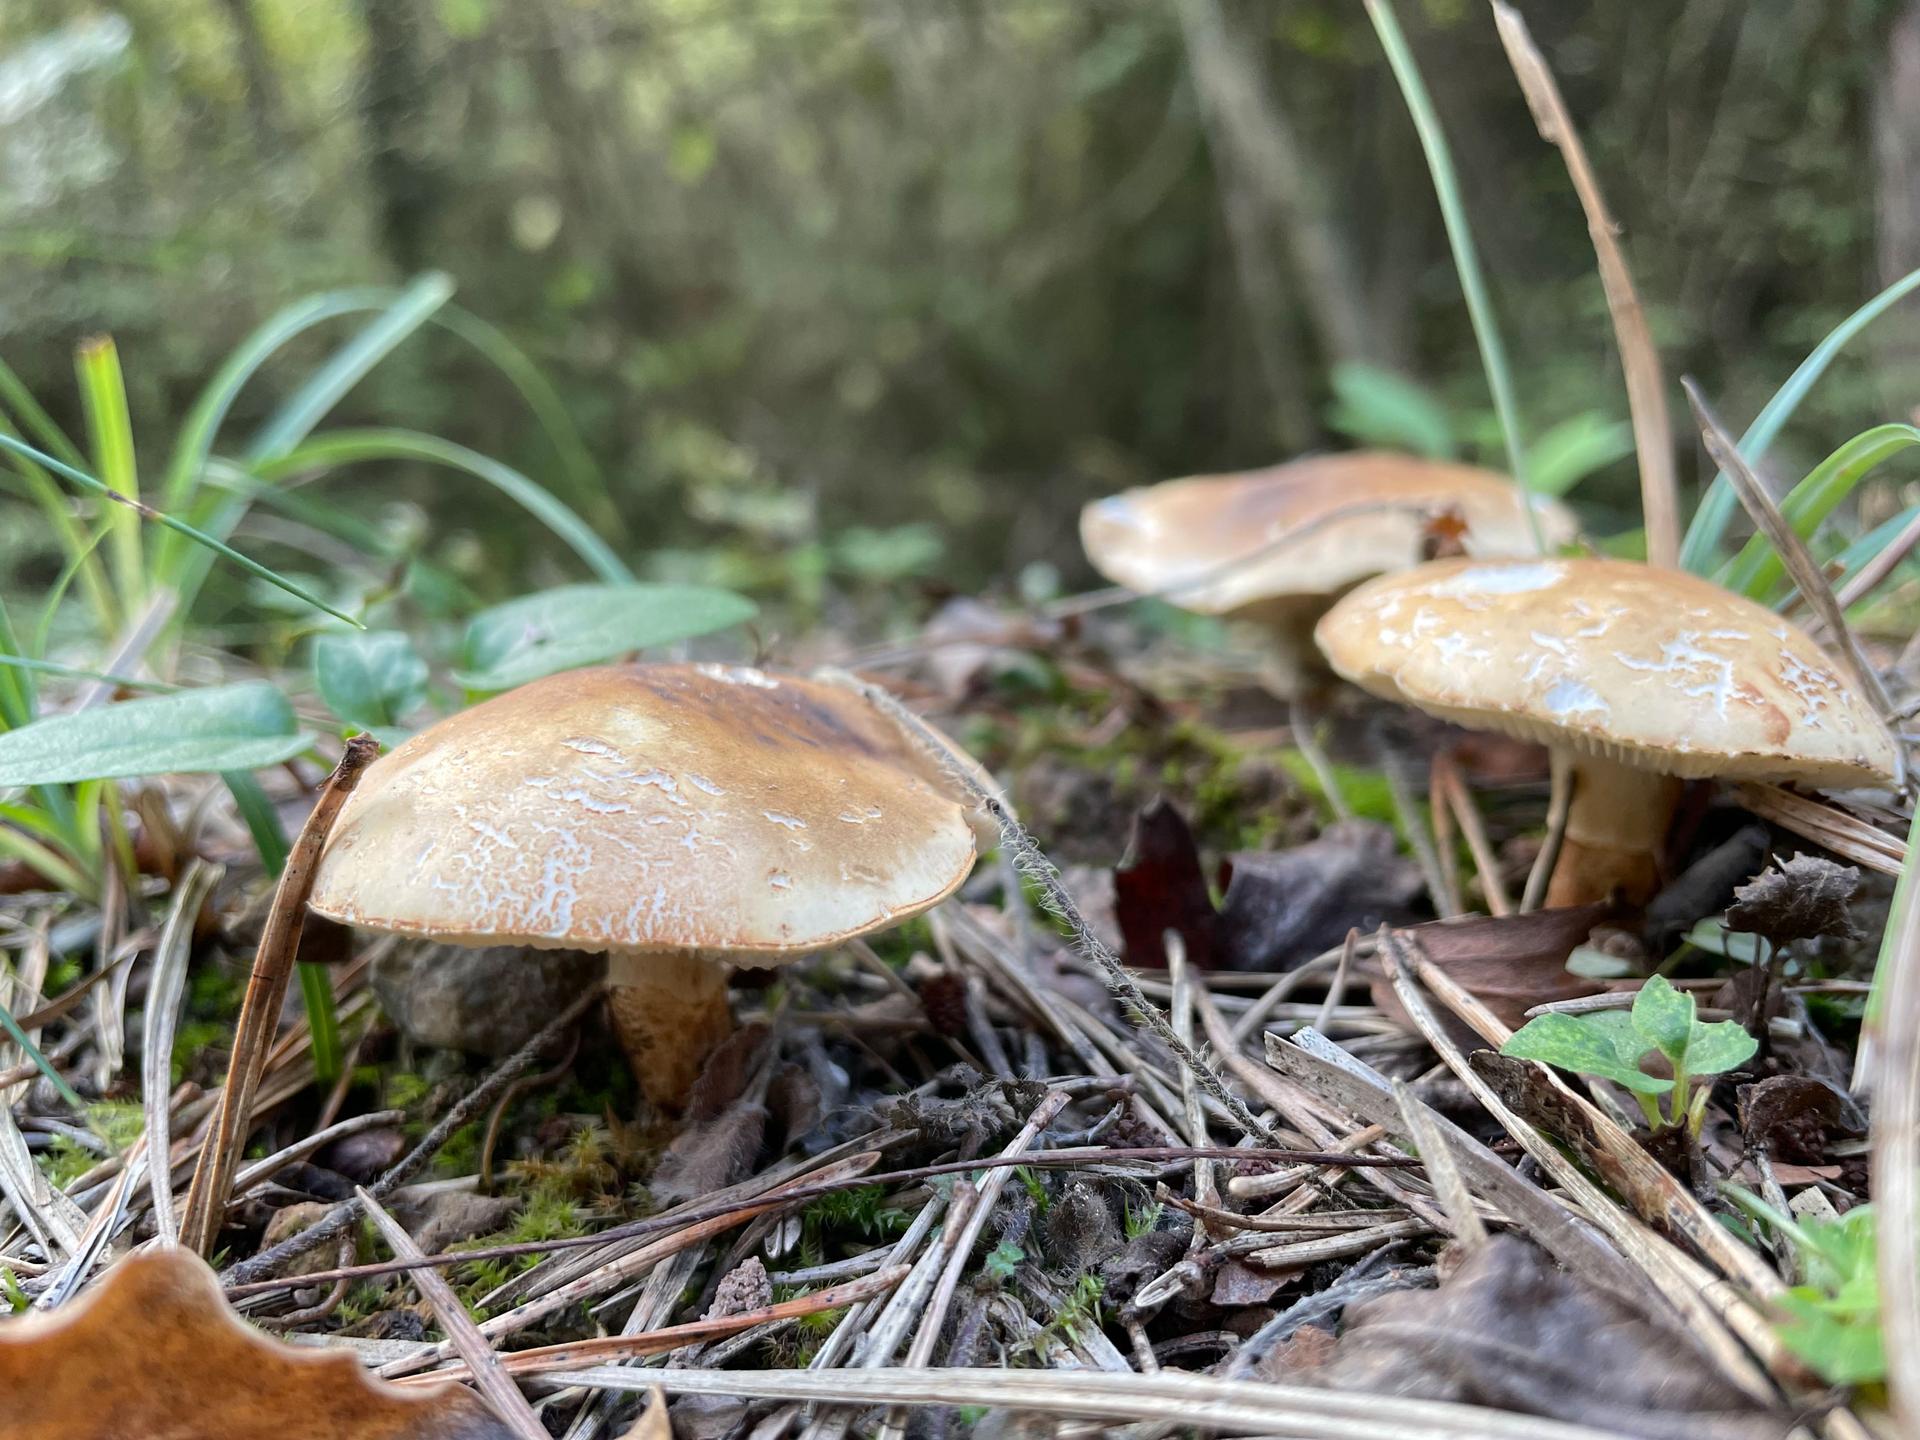 Throughout the two-hour hike, González found dozens of inedible mushrooms, some of which were poisonous. While most people choose to hike with someone who knows about mushrooms, there are apps available to help hikers detect which ones are safe to eat.